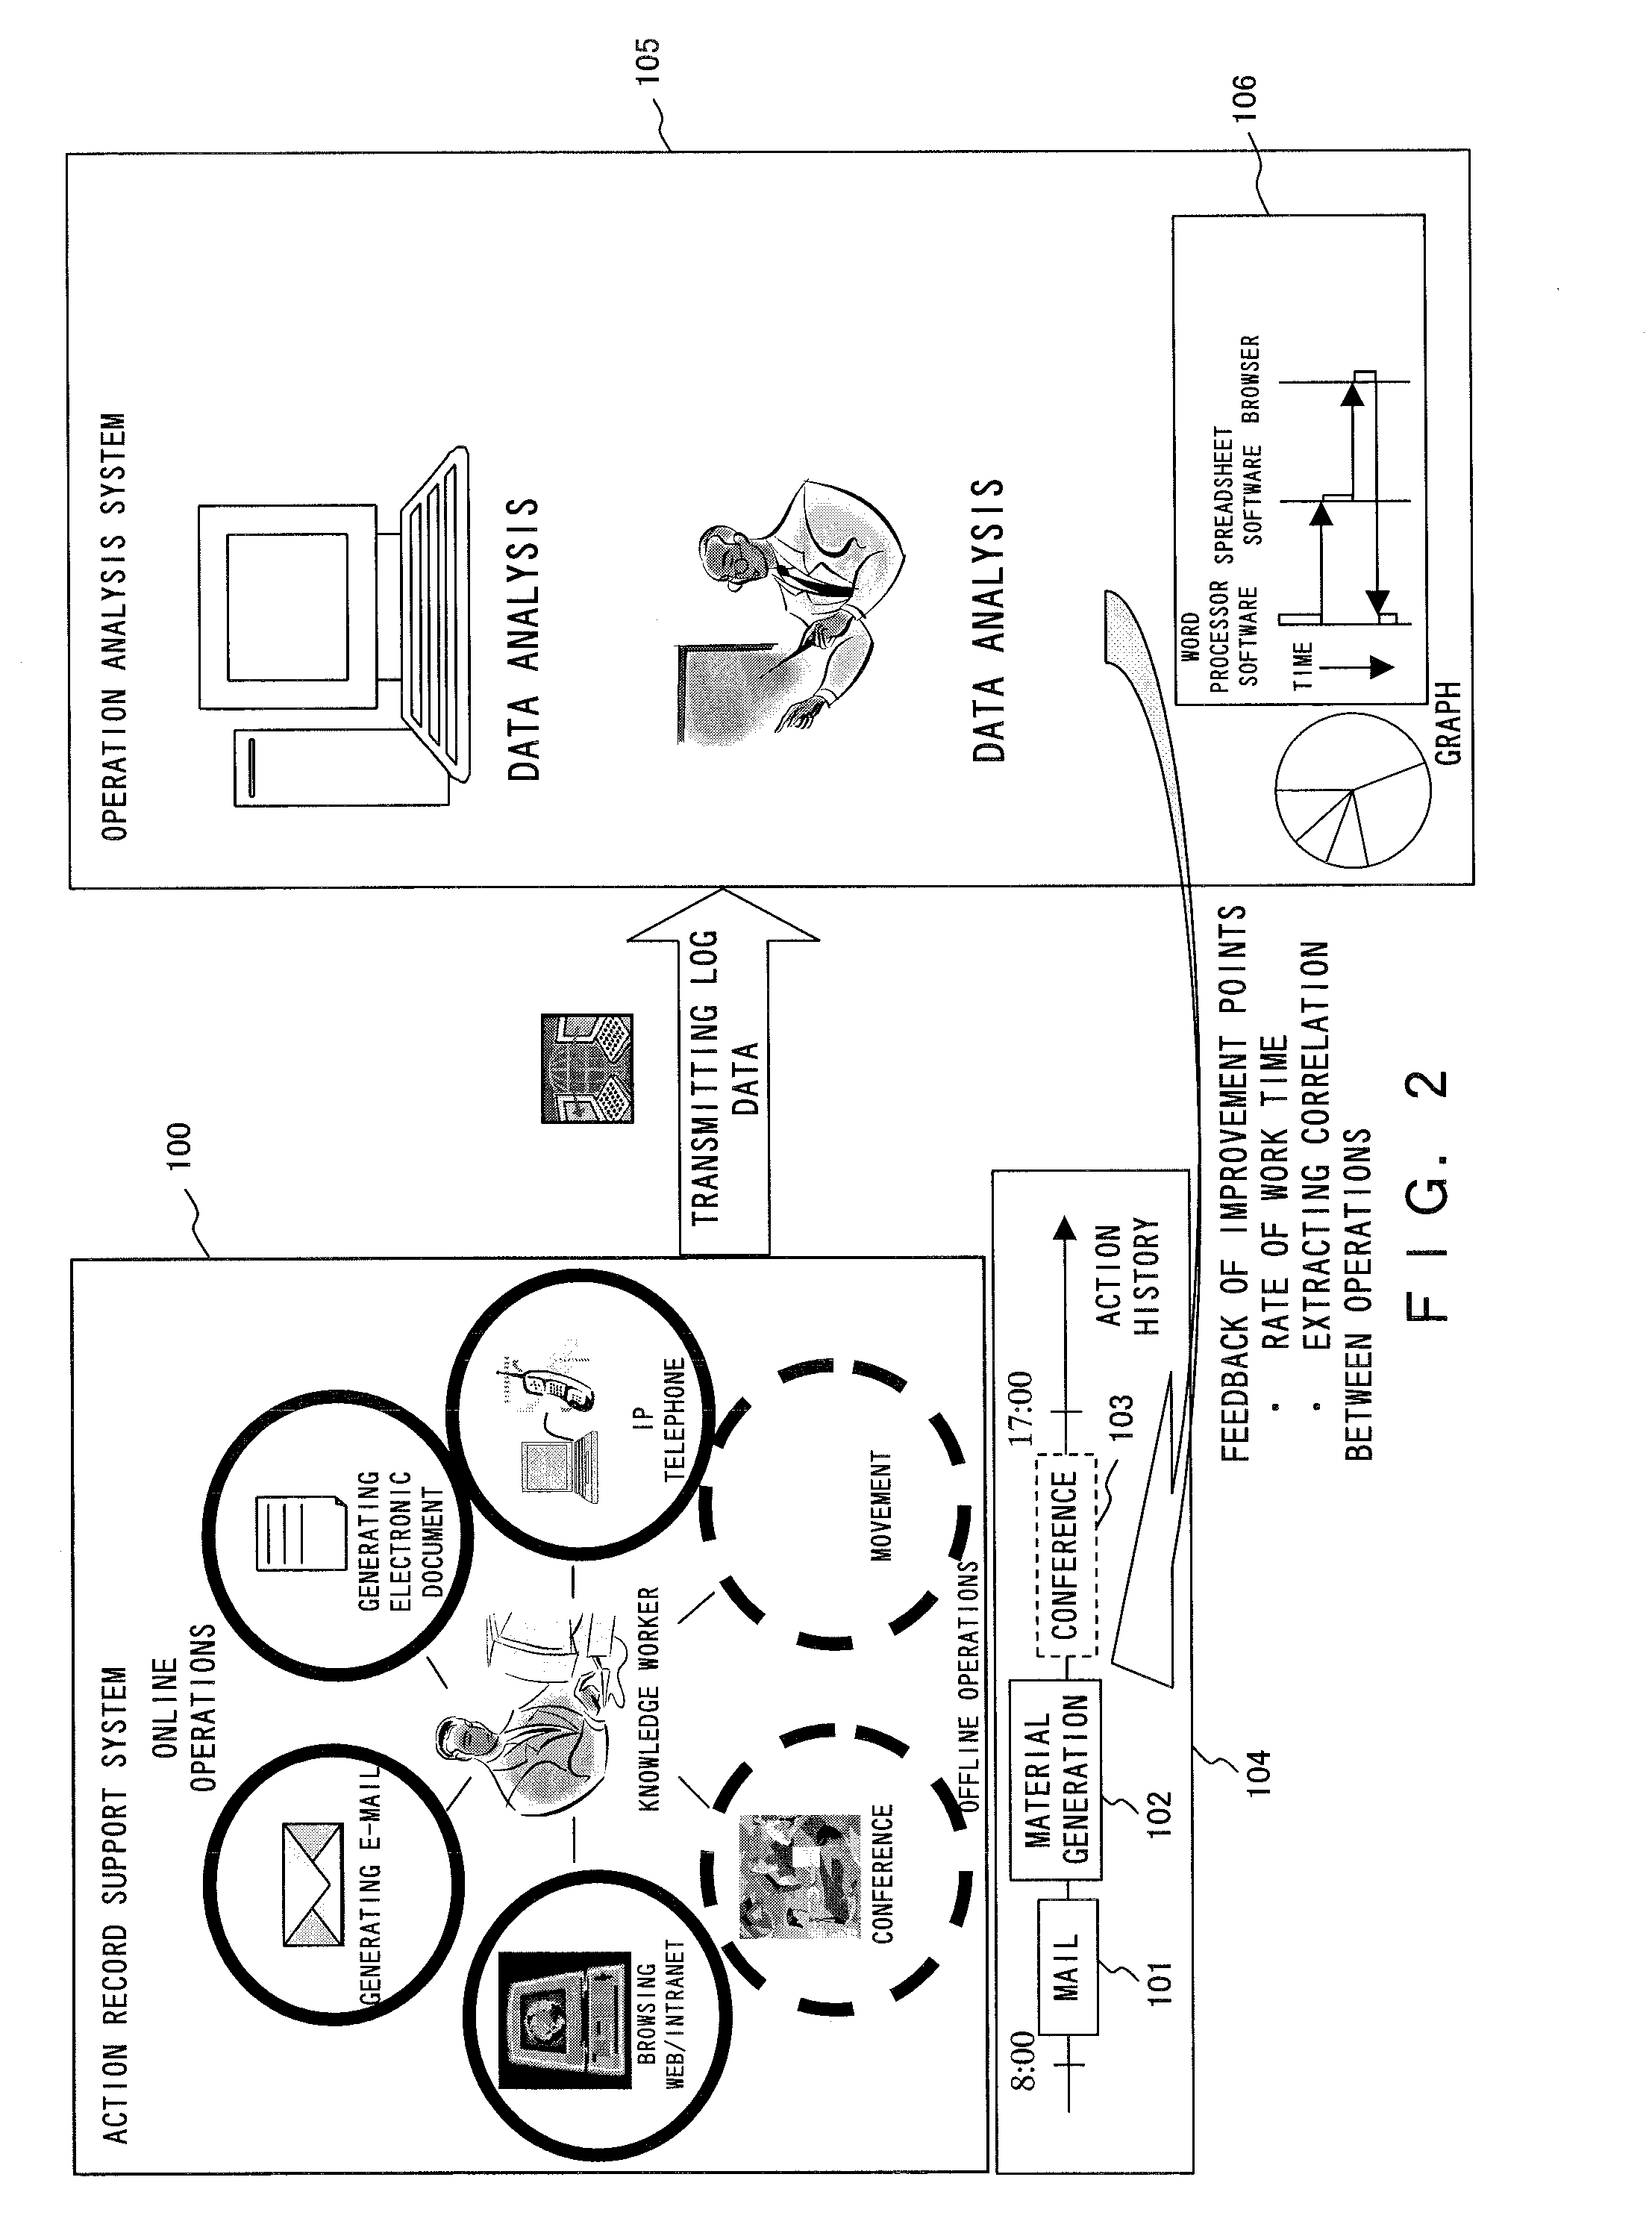 Action record support program, system, device, and method